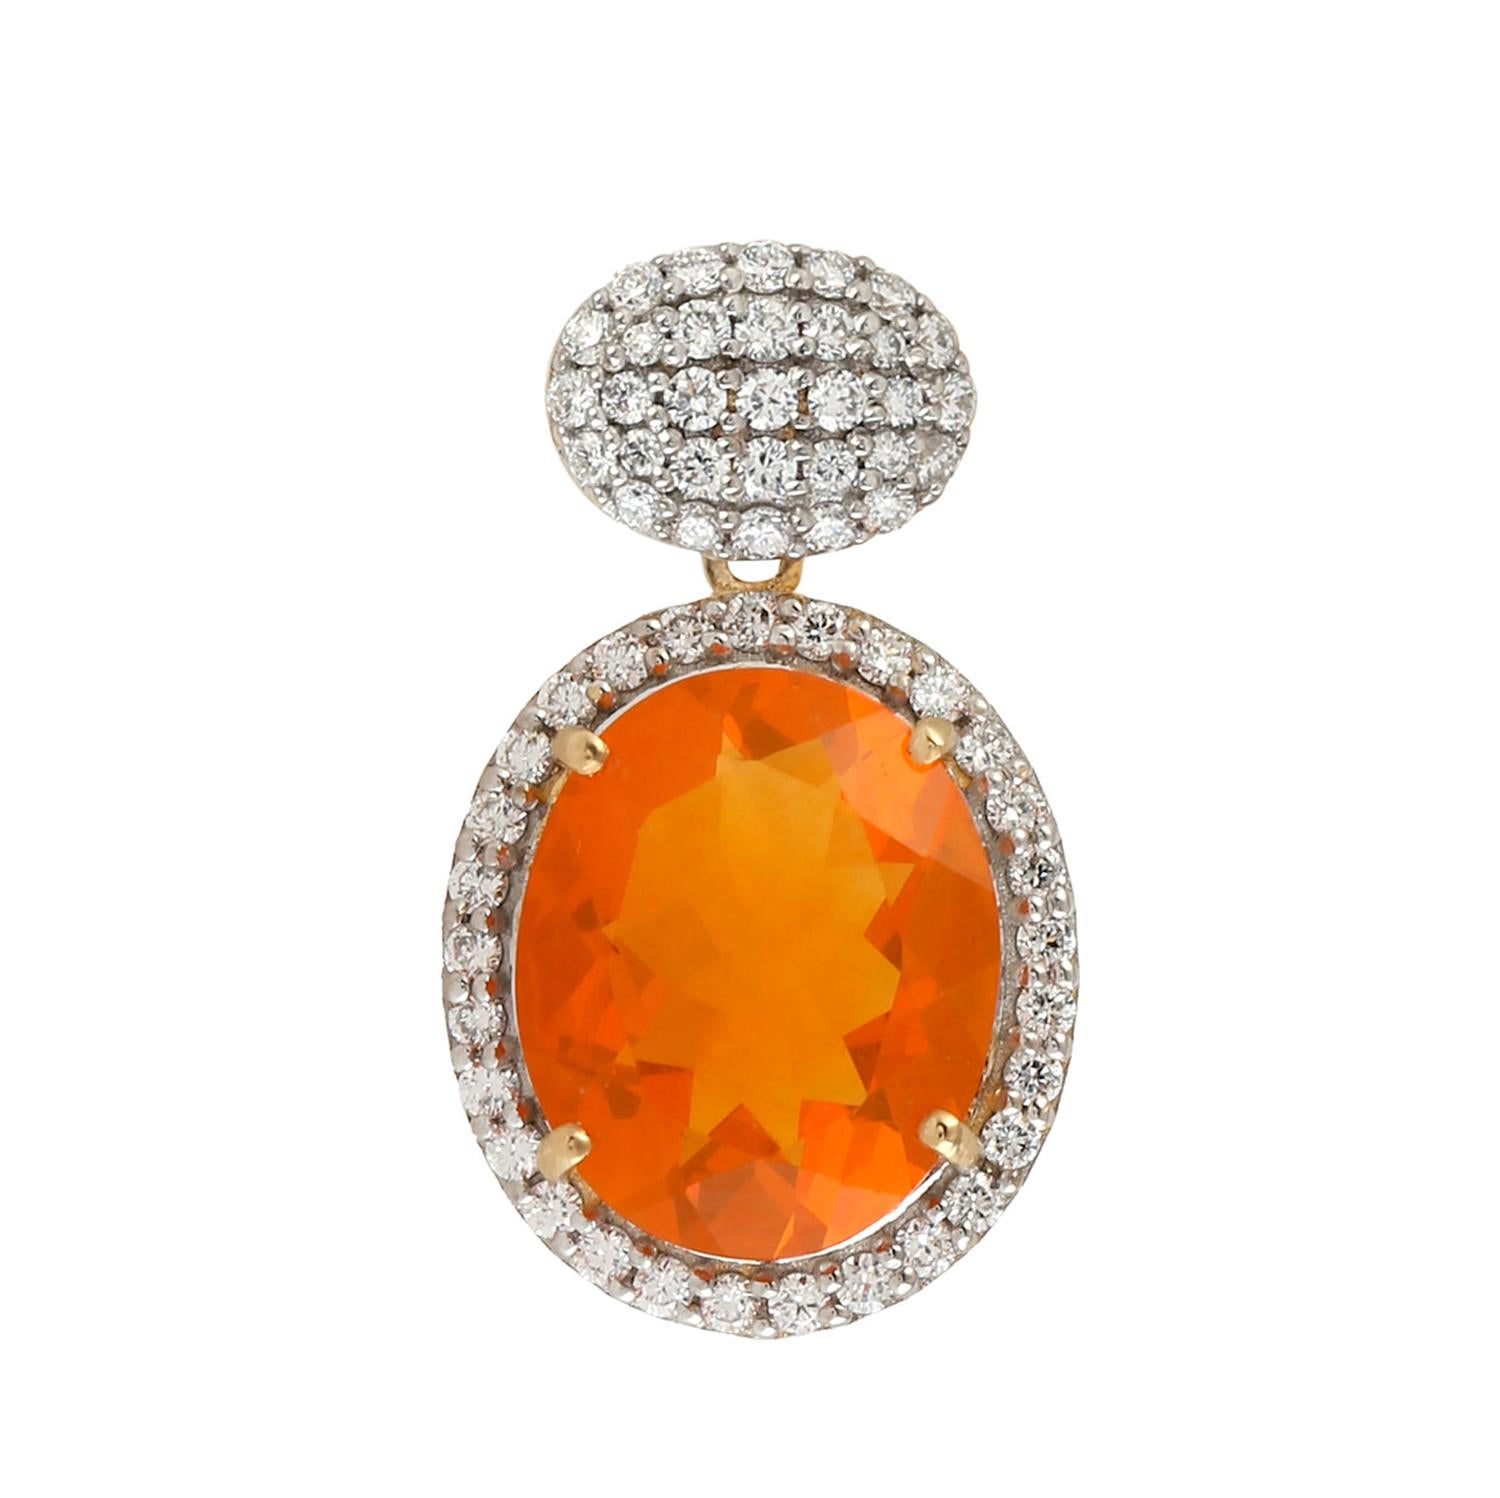 Natural Fire Opal And Diamond Drop Earrings 18K Yellow Gold 1